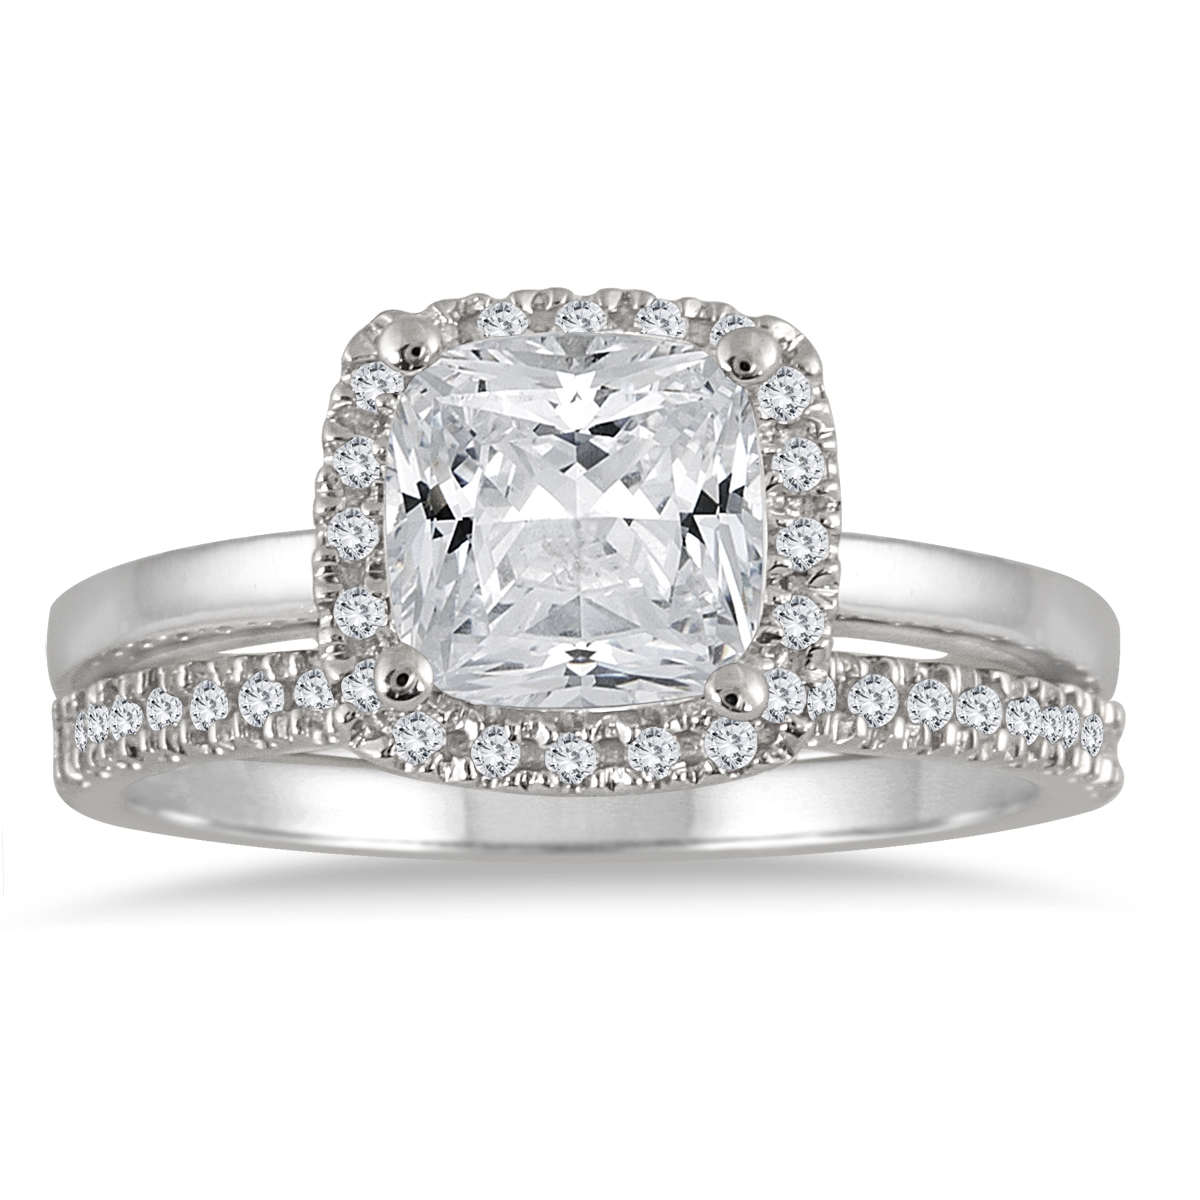 Image of AGS Certified 1 1/3 Carat TW Cushion Diamond Bridal Set in 14K White Gold